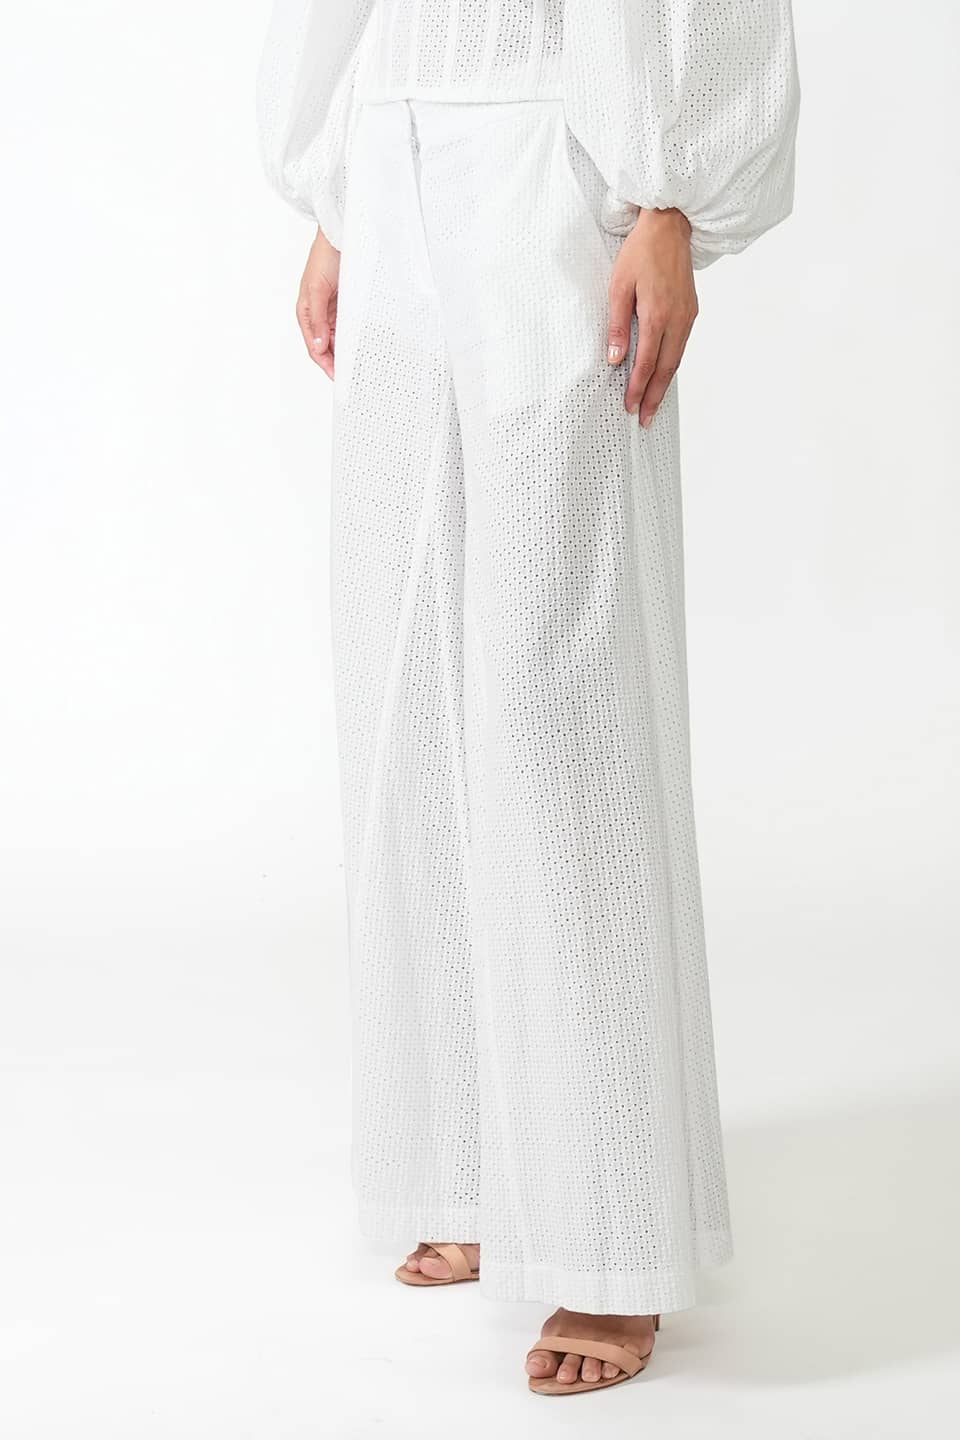 Designer White Women pants, shop online with free delivery in UAE. Product gallery 4